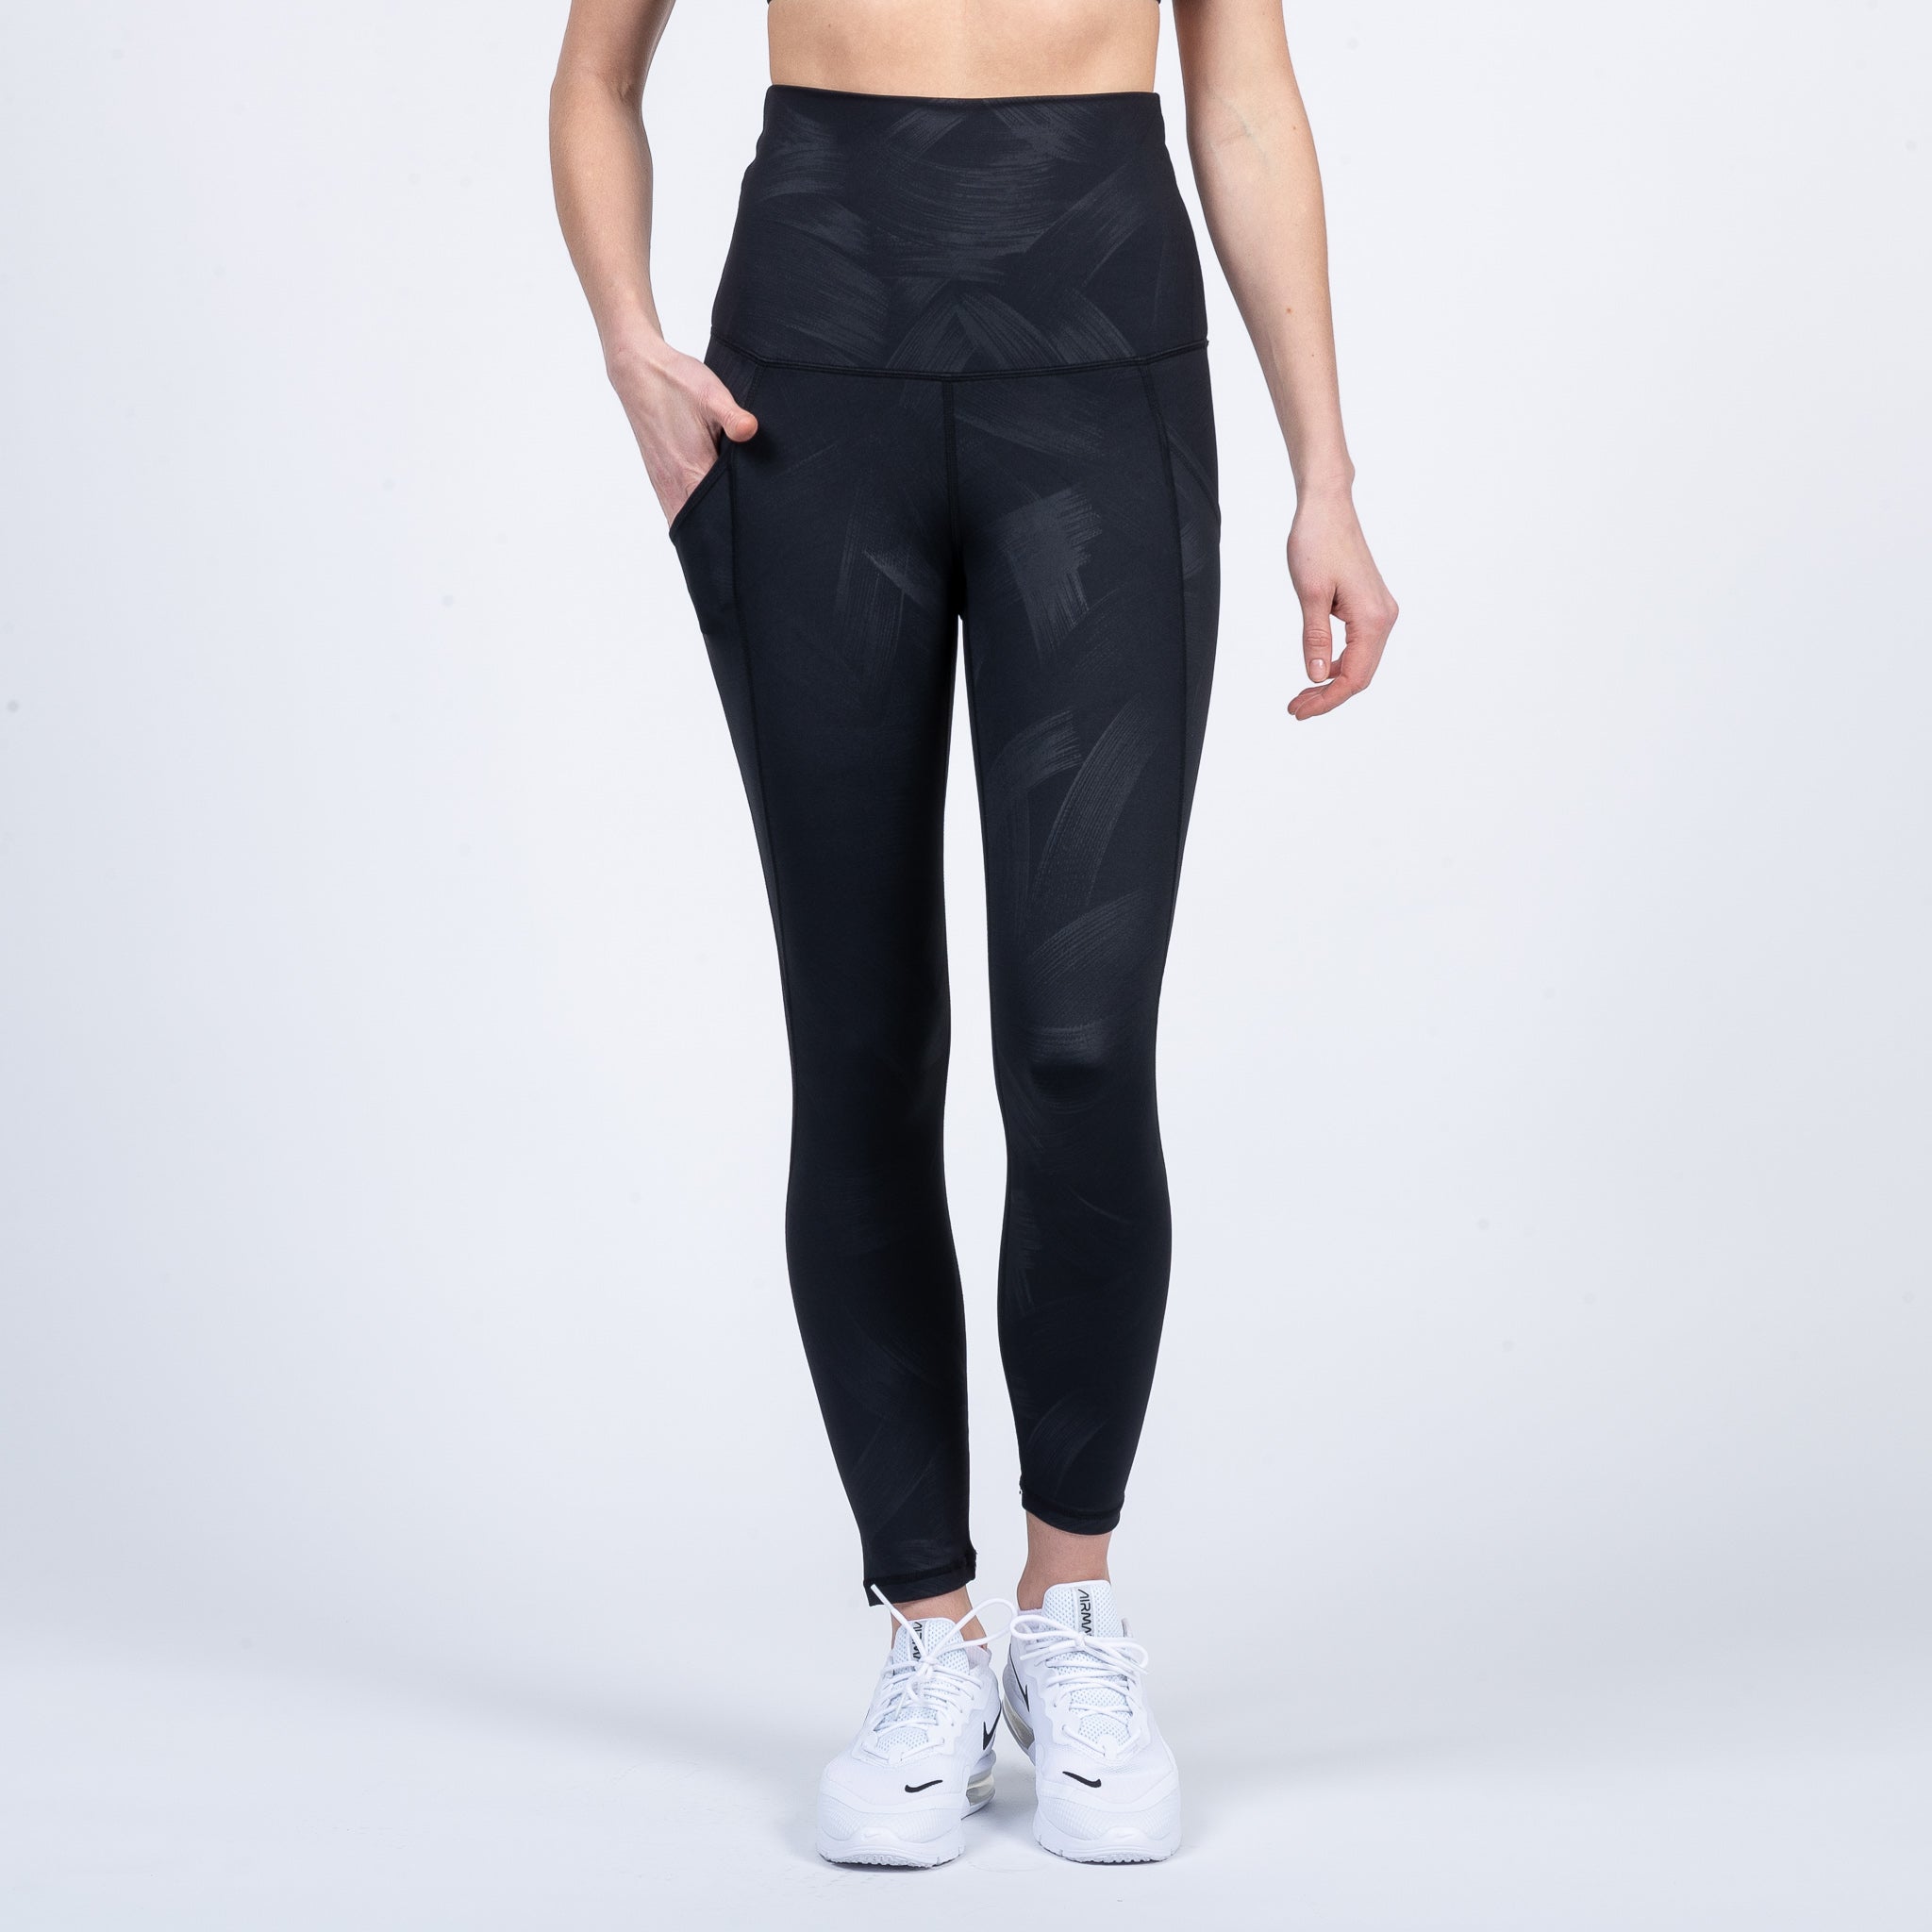 adidas Women's Believe This Glam on Long Tights, Leggings -  Canada